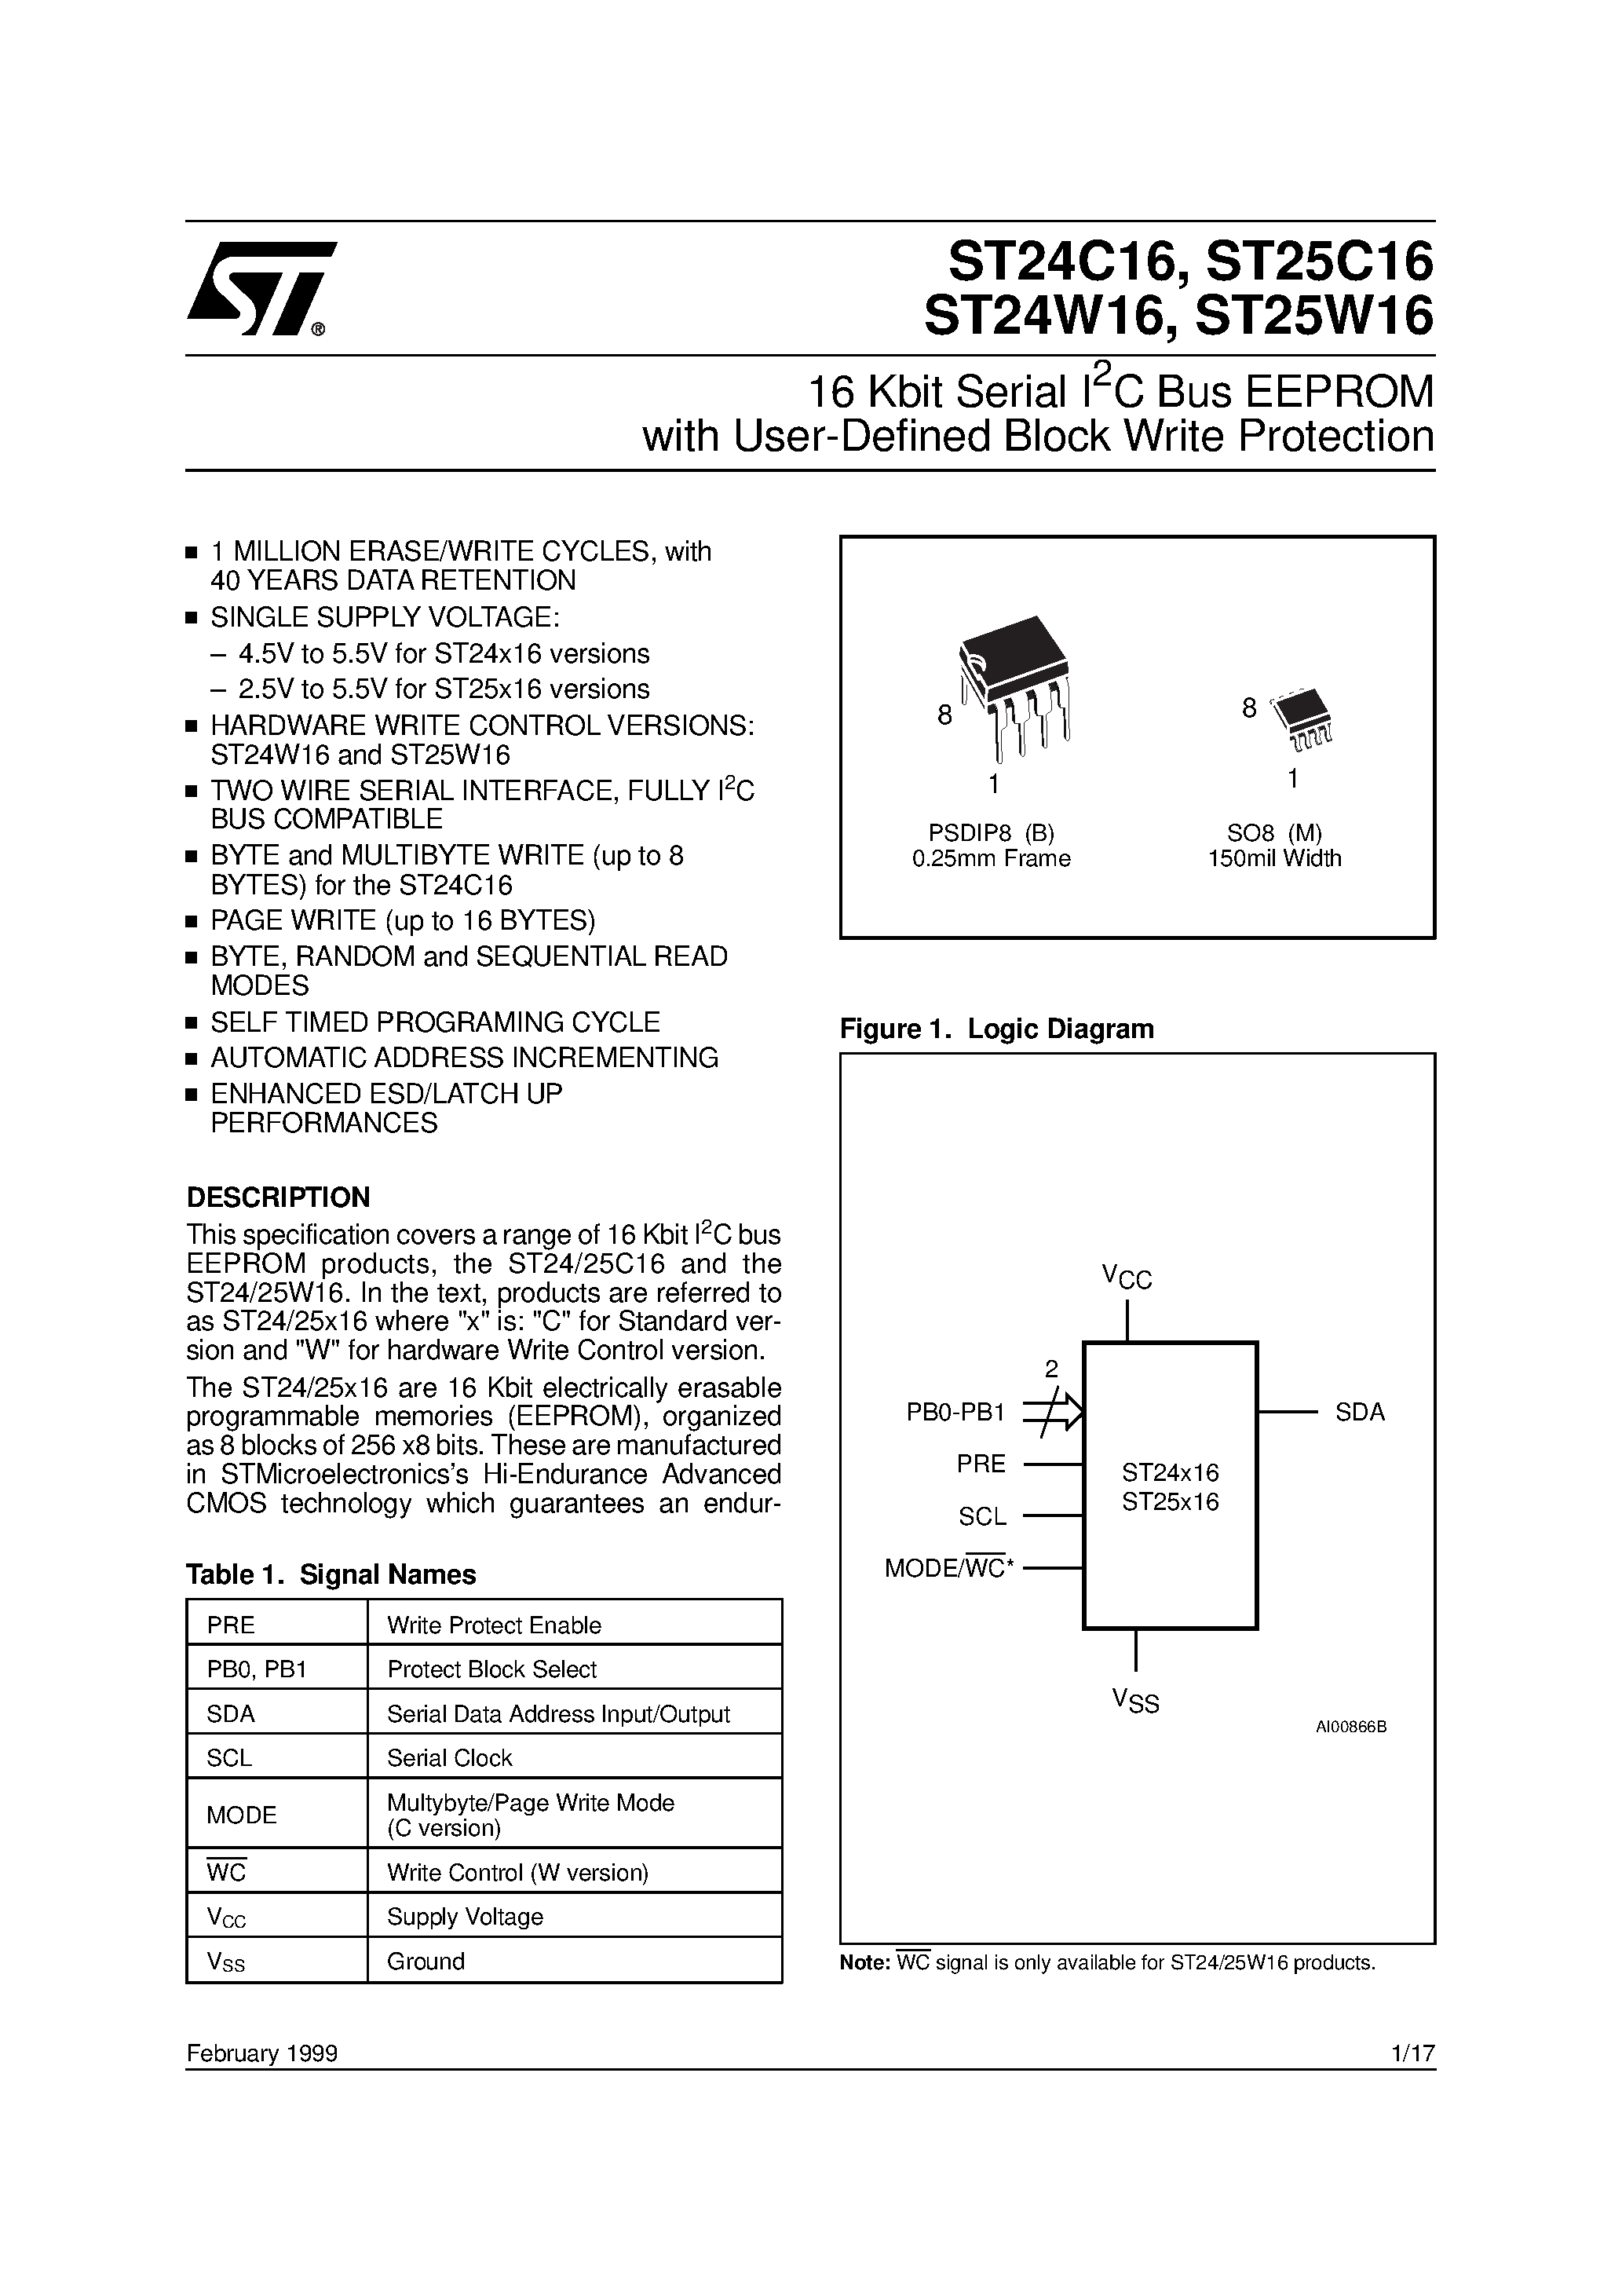 Datasheet ST24W16 - 16 Kbit Serial I2C Bus EEPROM with User-Defined Block Write Protection page 1